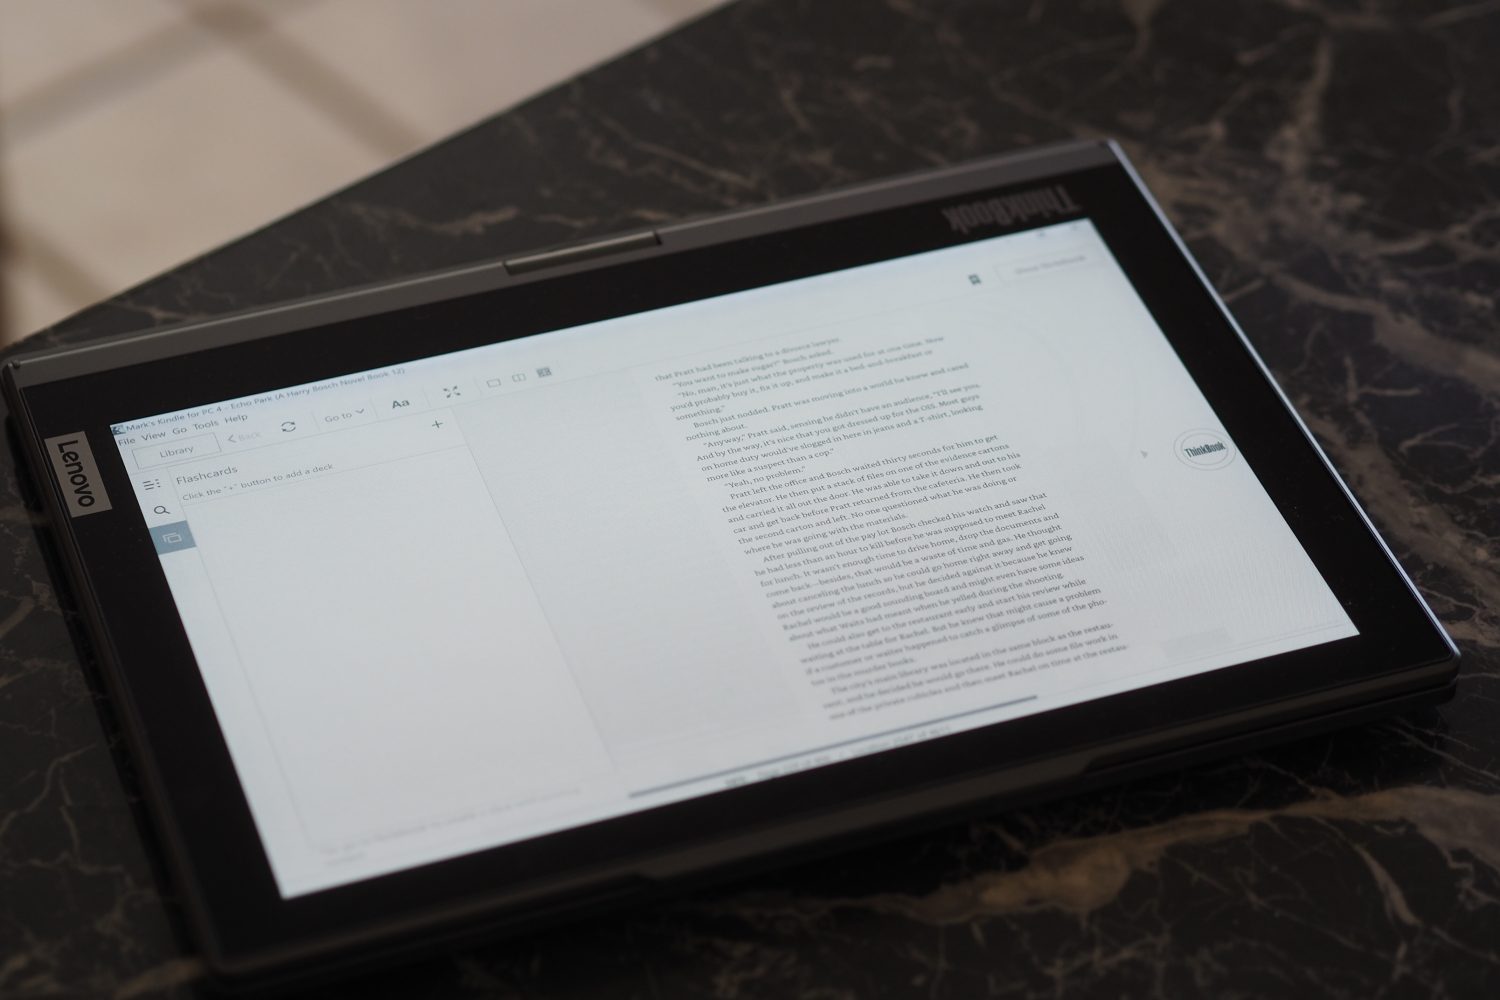 BOOX New E-Ink Notebook/E-Reader and Work Station